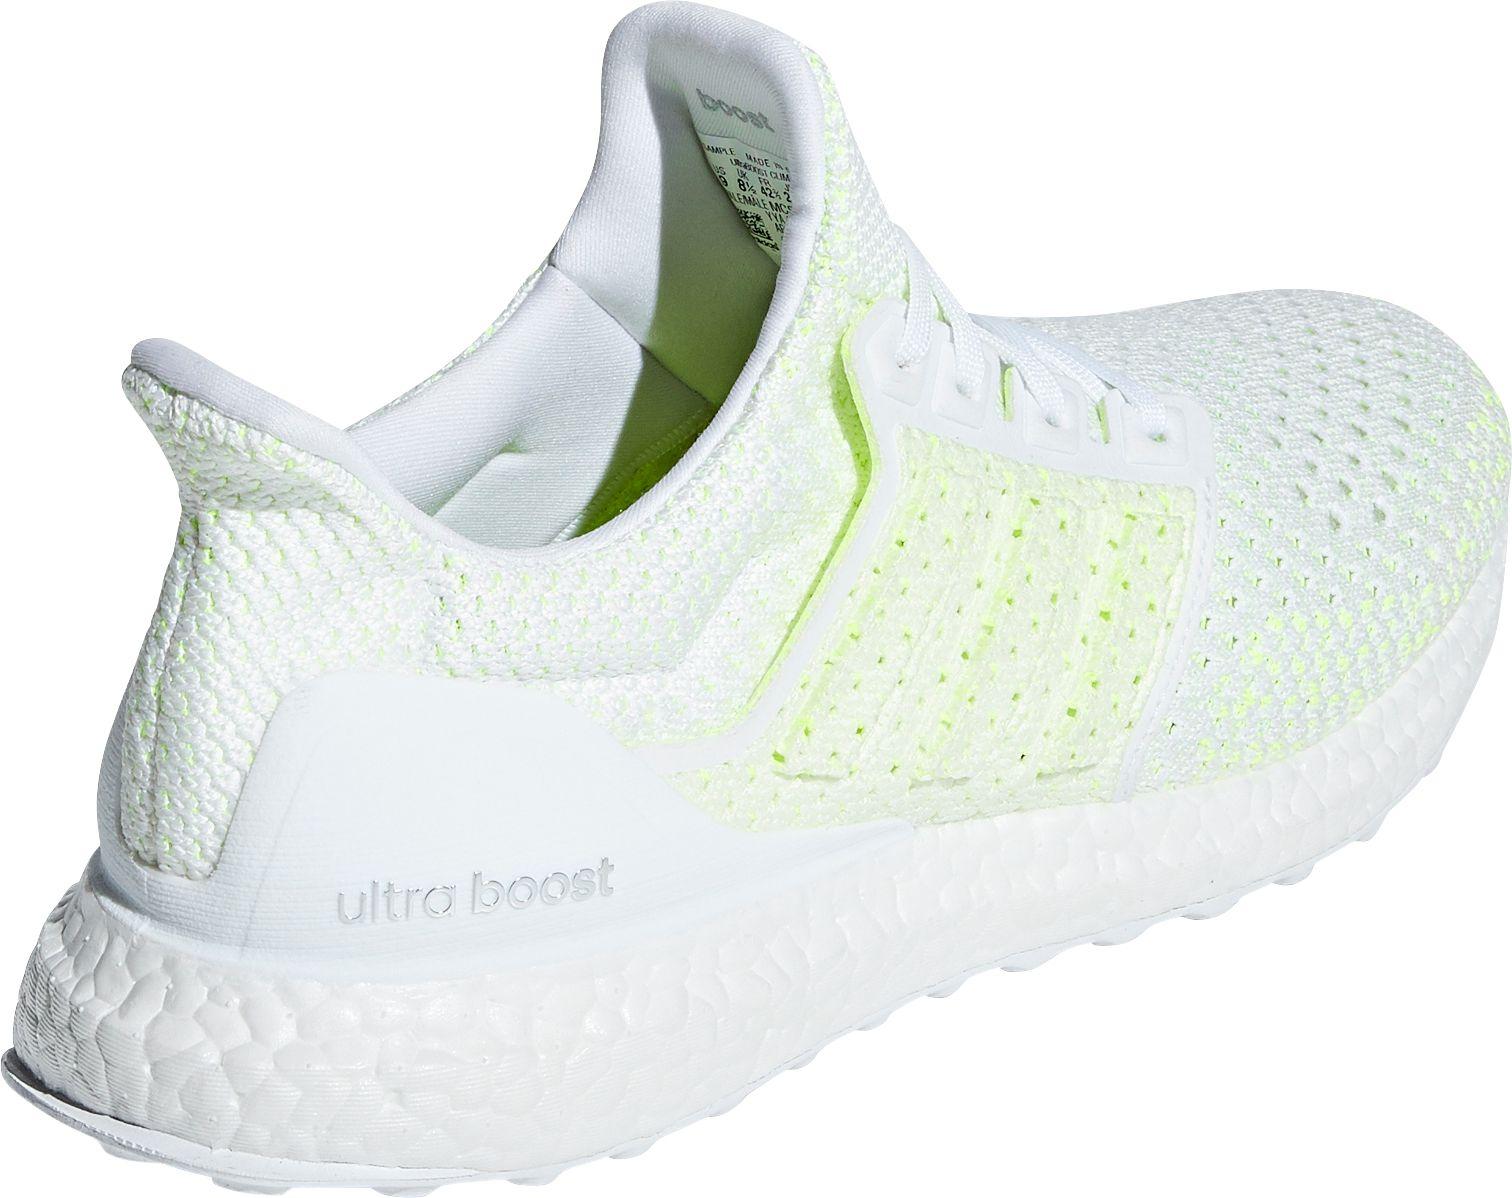 ultraboost clima shoes white